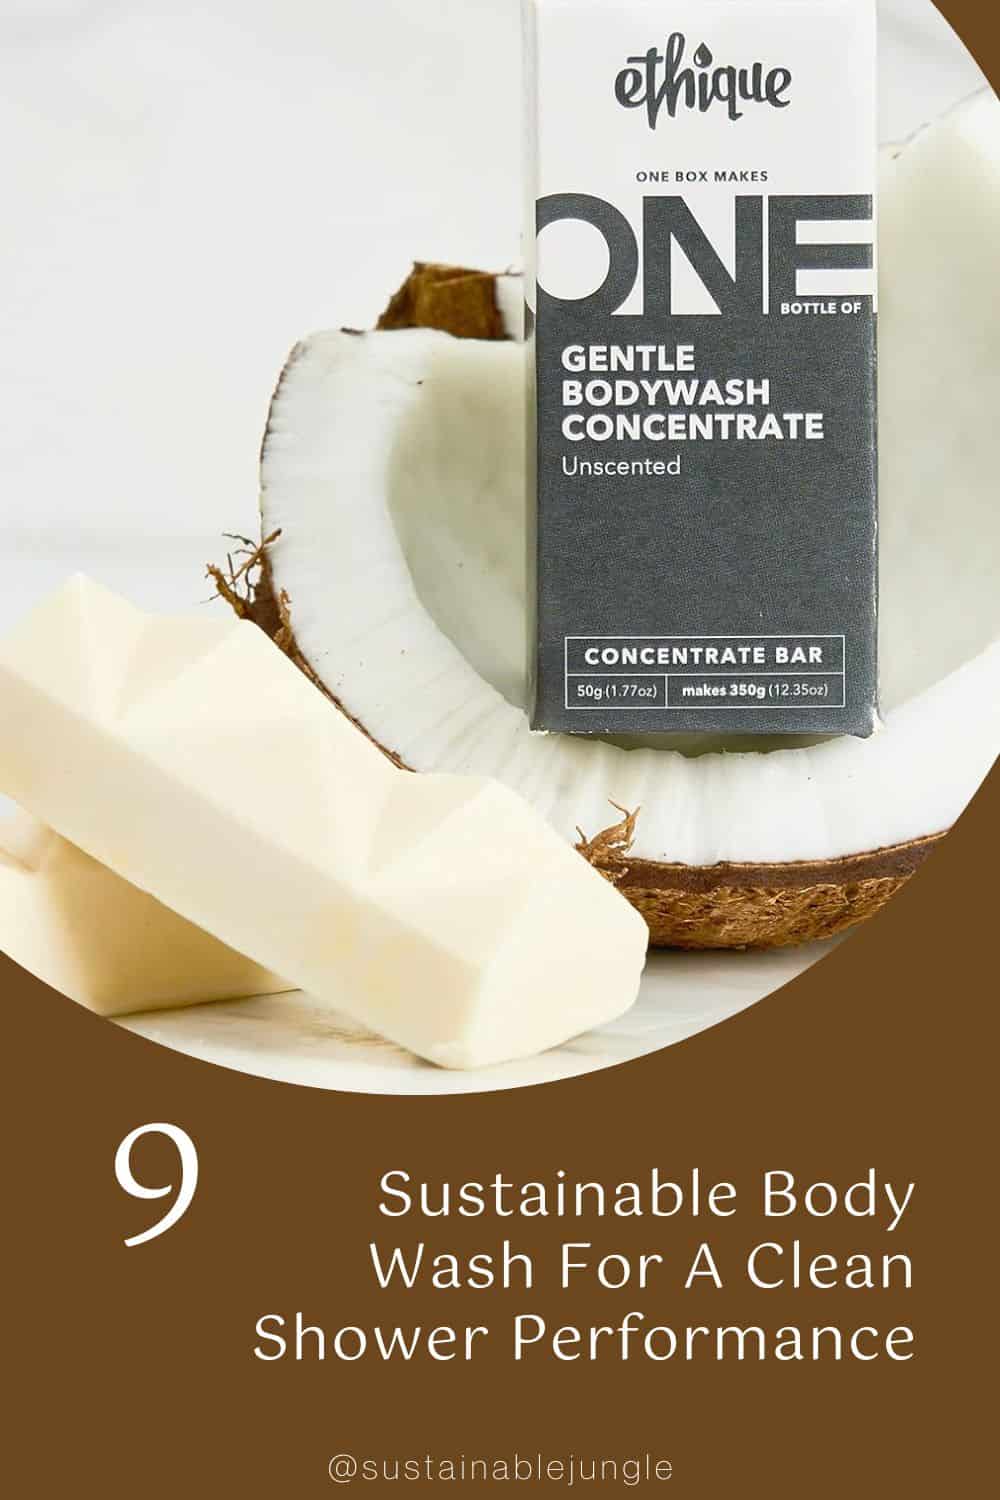 9 Sustainable Body Wash For A Clean Shower Performance Image by Ethique #sustainablebodywash #ecofriendlybodywash #bestsustainablebodywash #bestecofriendlybodywash #sustainablebodywashbrands #ecofriendlybodywashbar #sustainablejungle